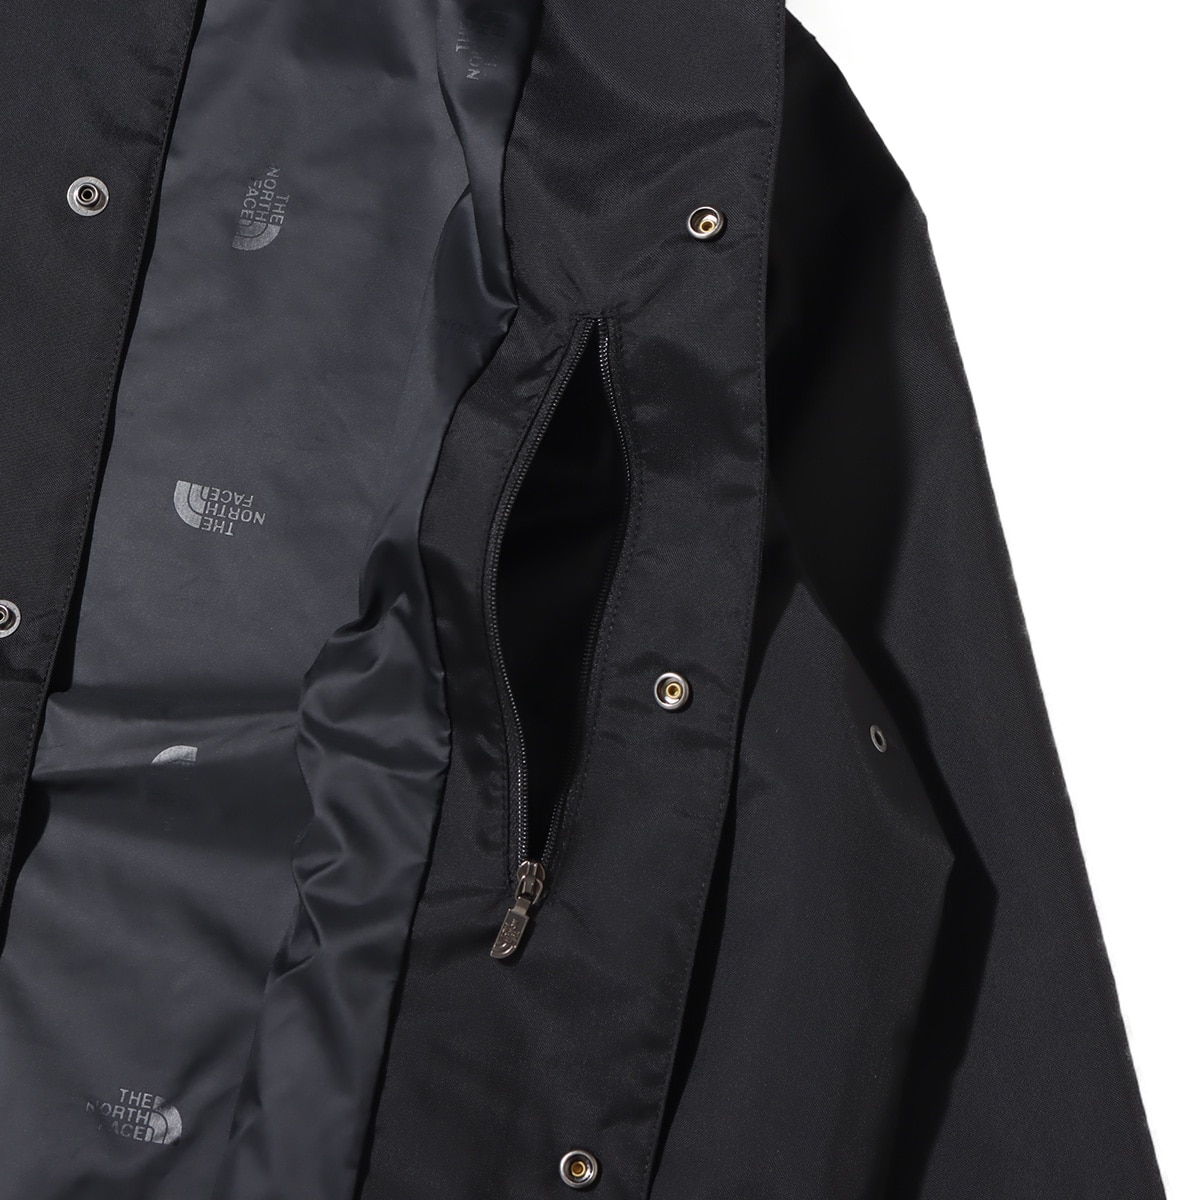 THE NORTH FACE NEVER STOP ING THE COACH JACKET BLACK